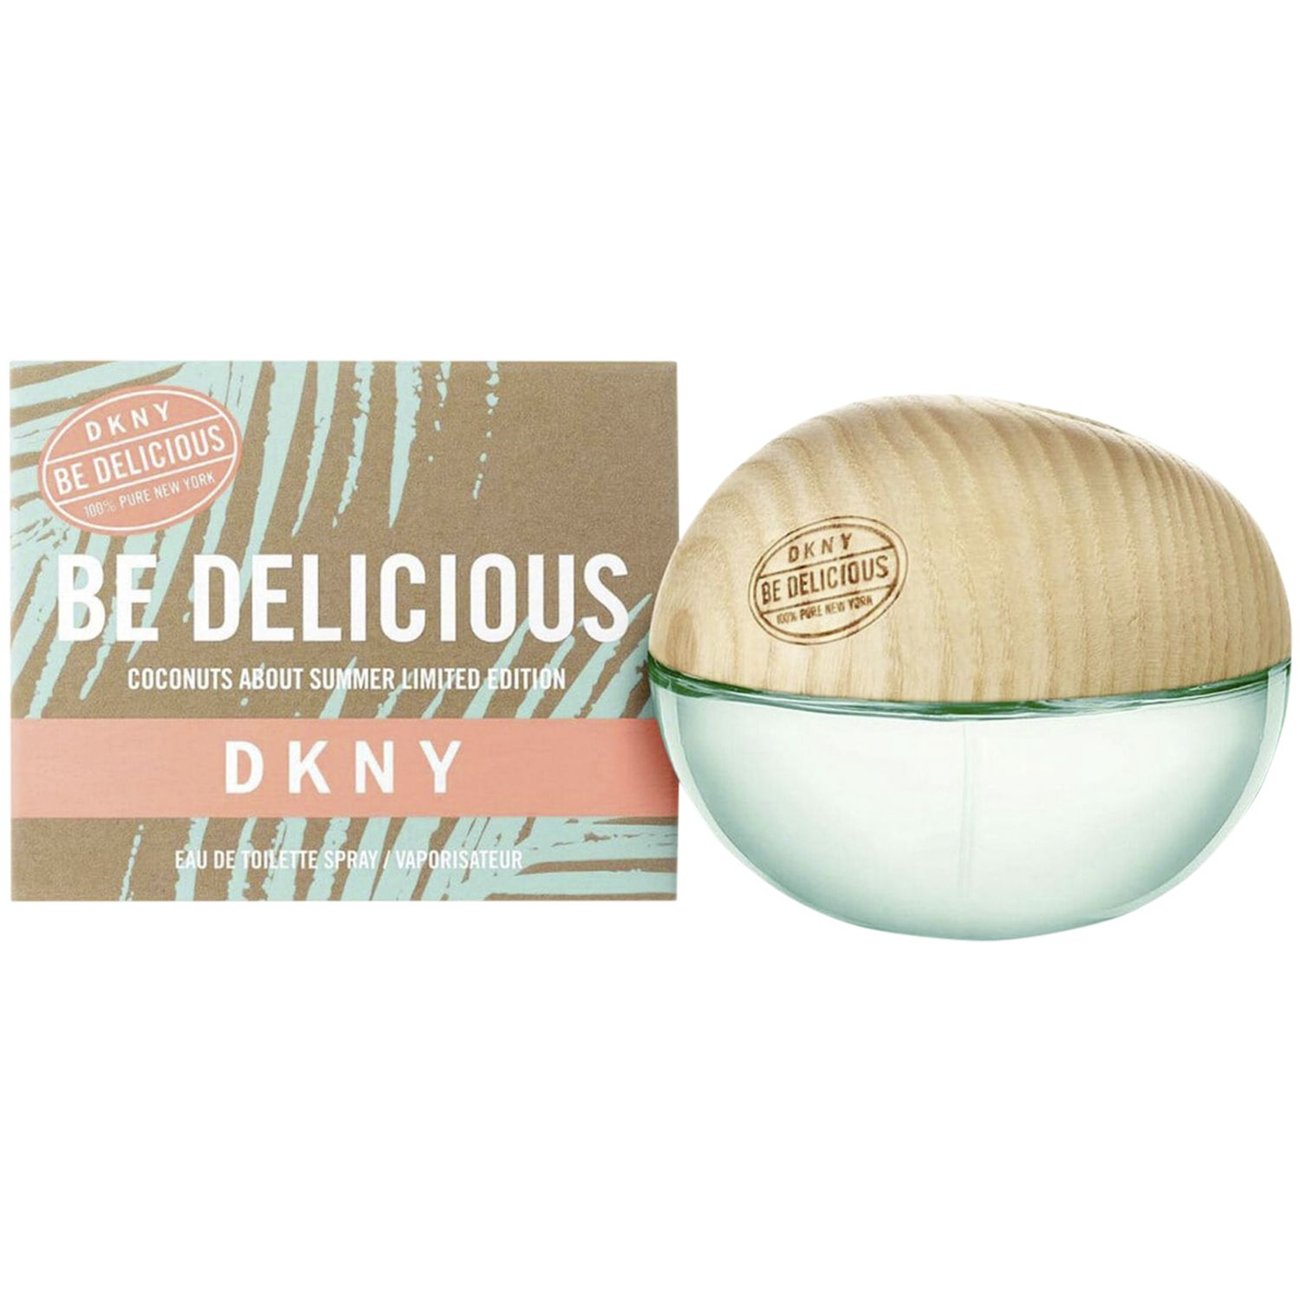 Be Delicious Coconuts About Summer von DKNY